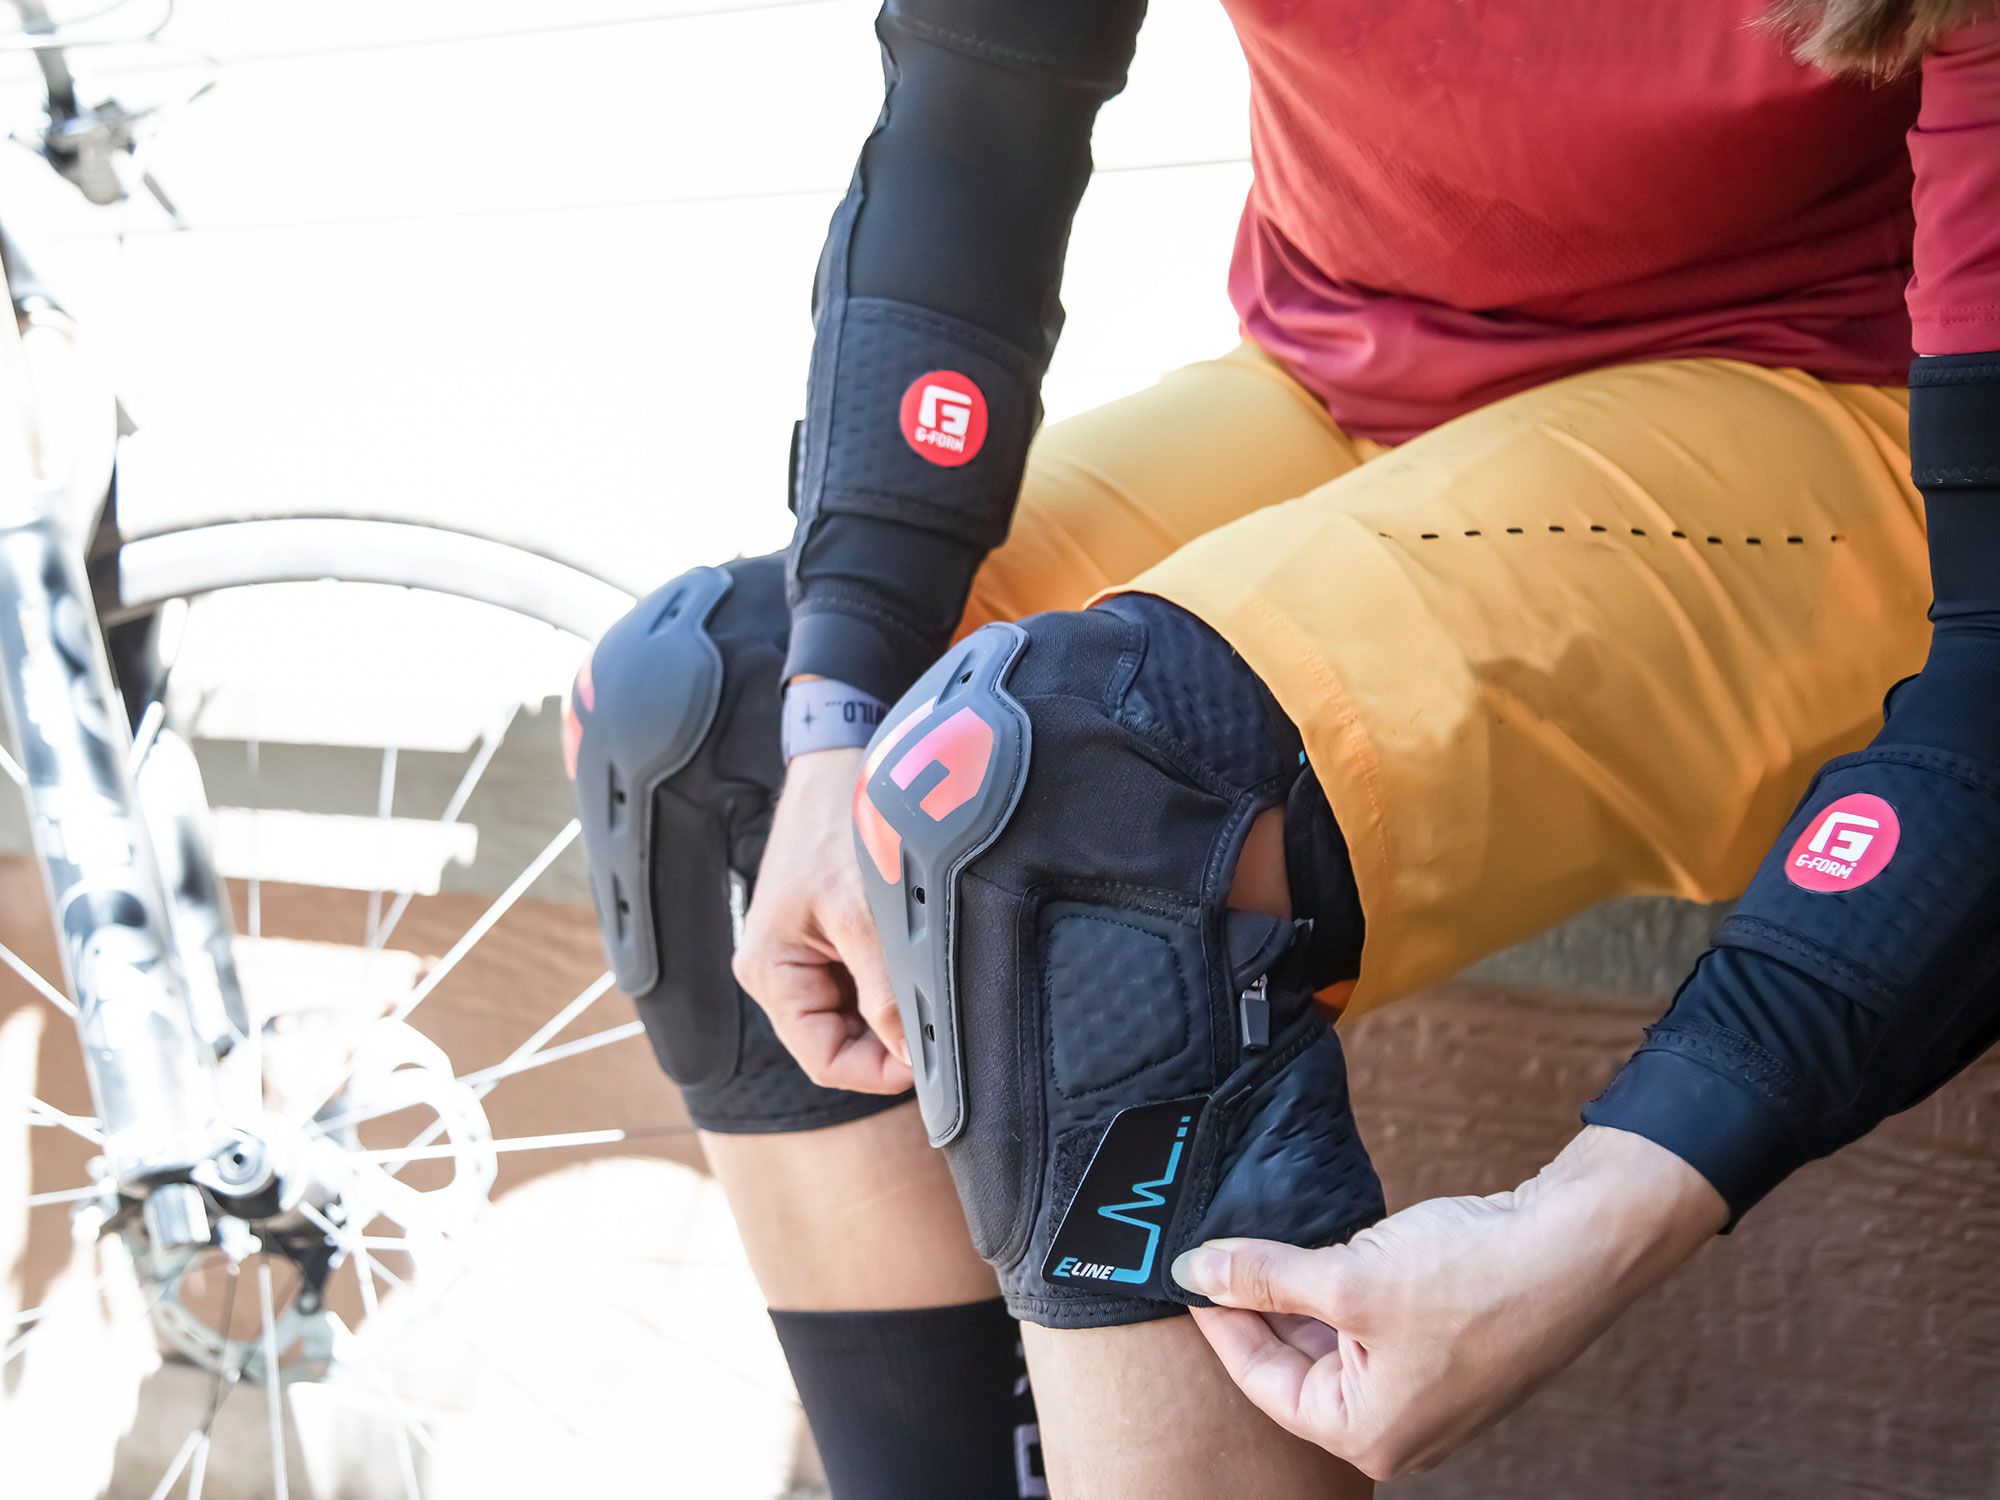 G-Form Mountain Bike Knee Pads - First Look! 